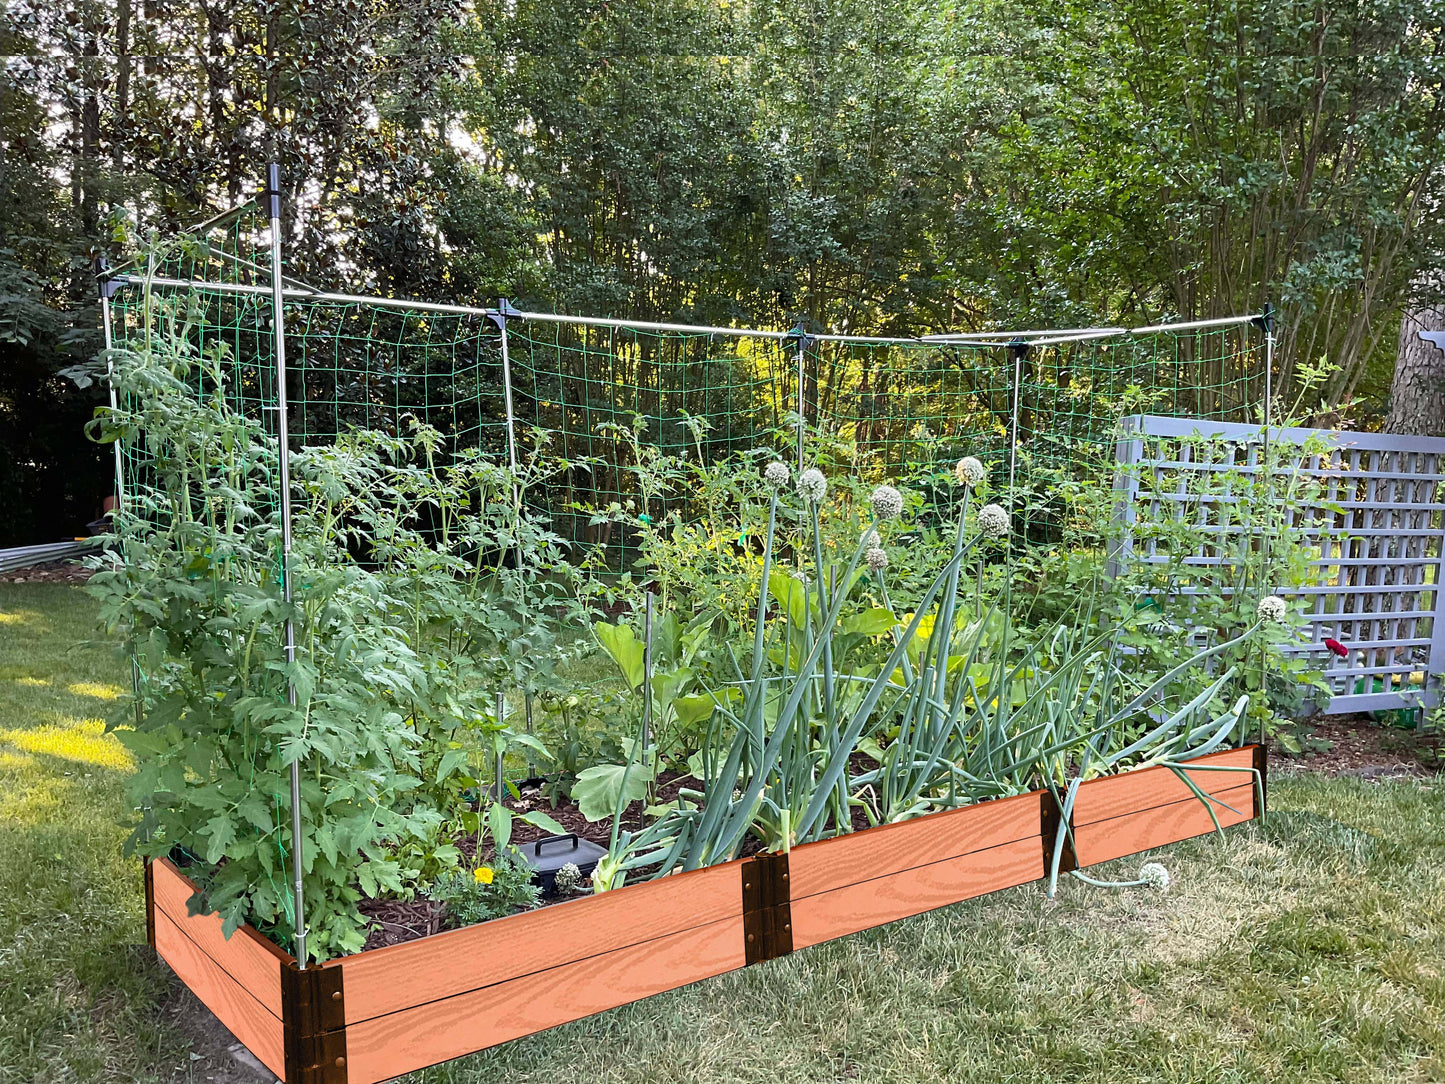 4' x 12' Raised Garden Bed with Trellis Raised Garden Beds Frame It All Classic Sienna 1" 2 = 11"